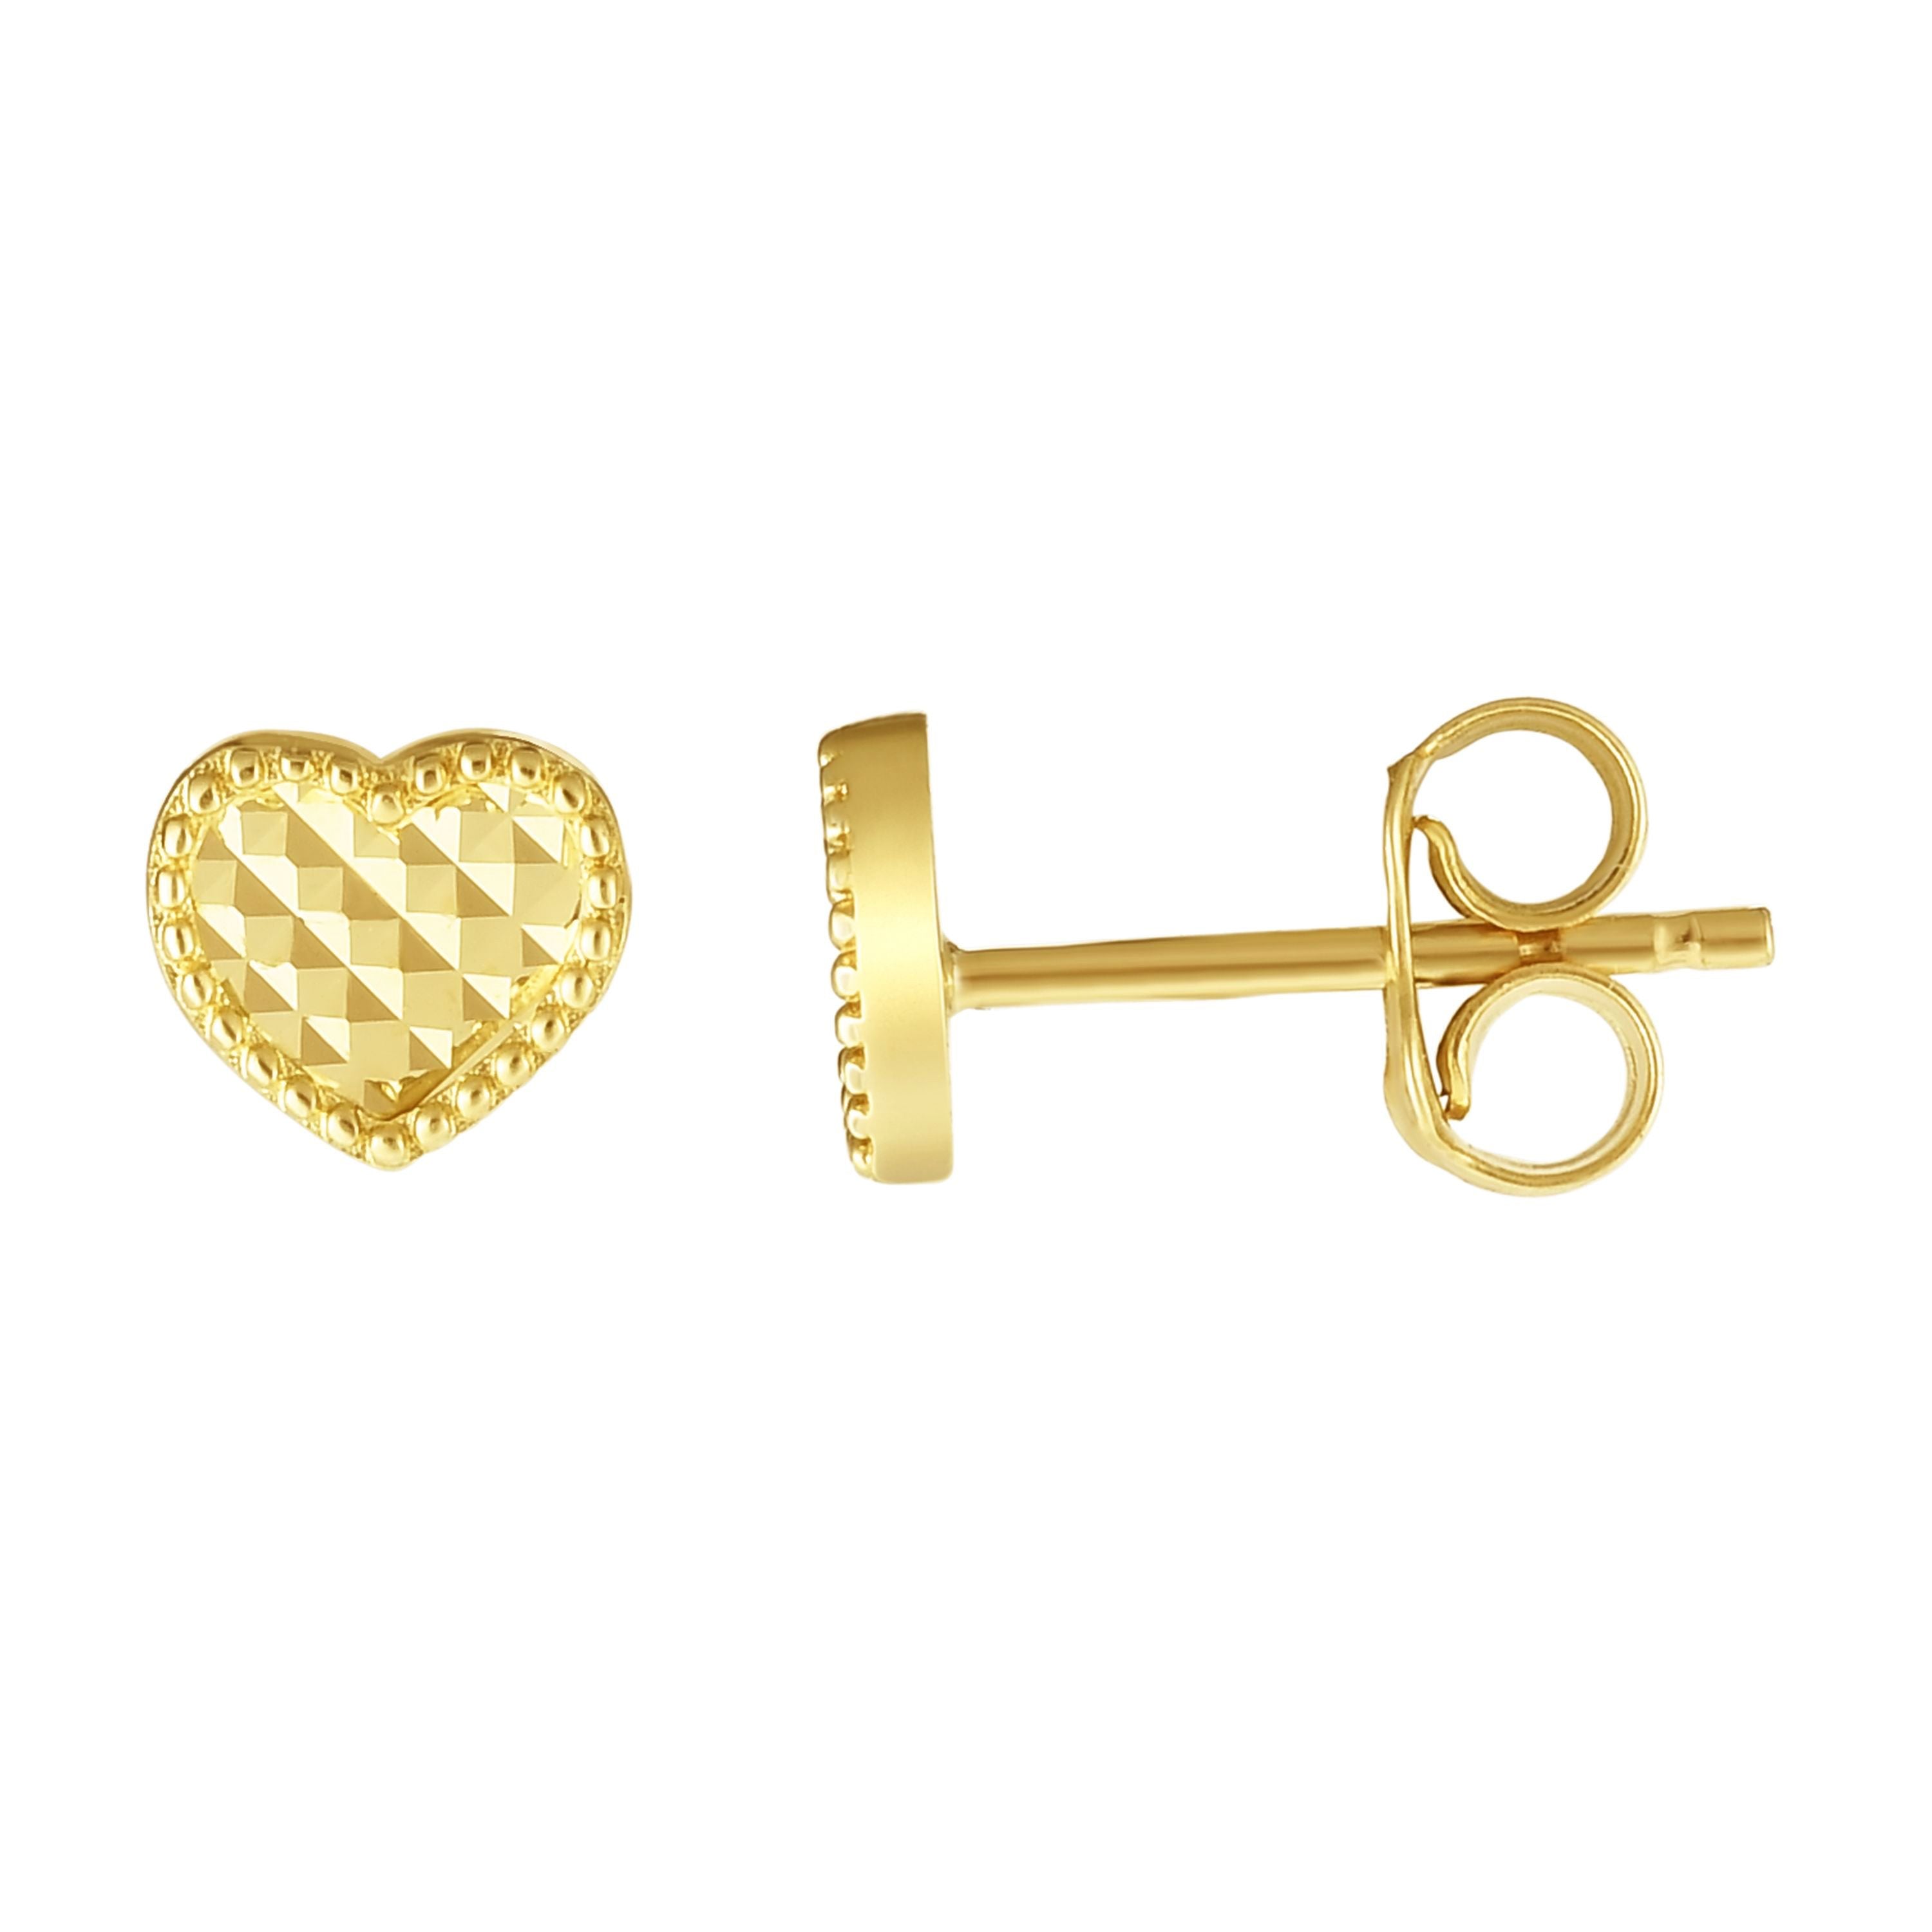 Minimalist Solid Gold Diamond Cut Heart with Push Back Clasp Earrings - wingroupjewelry